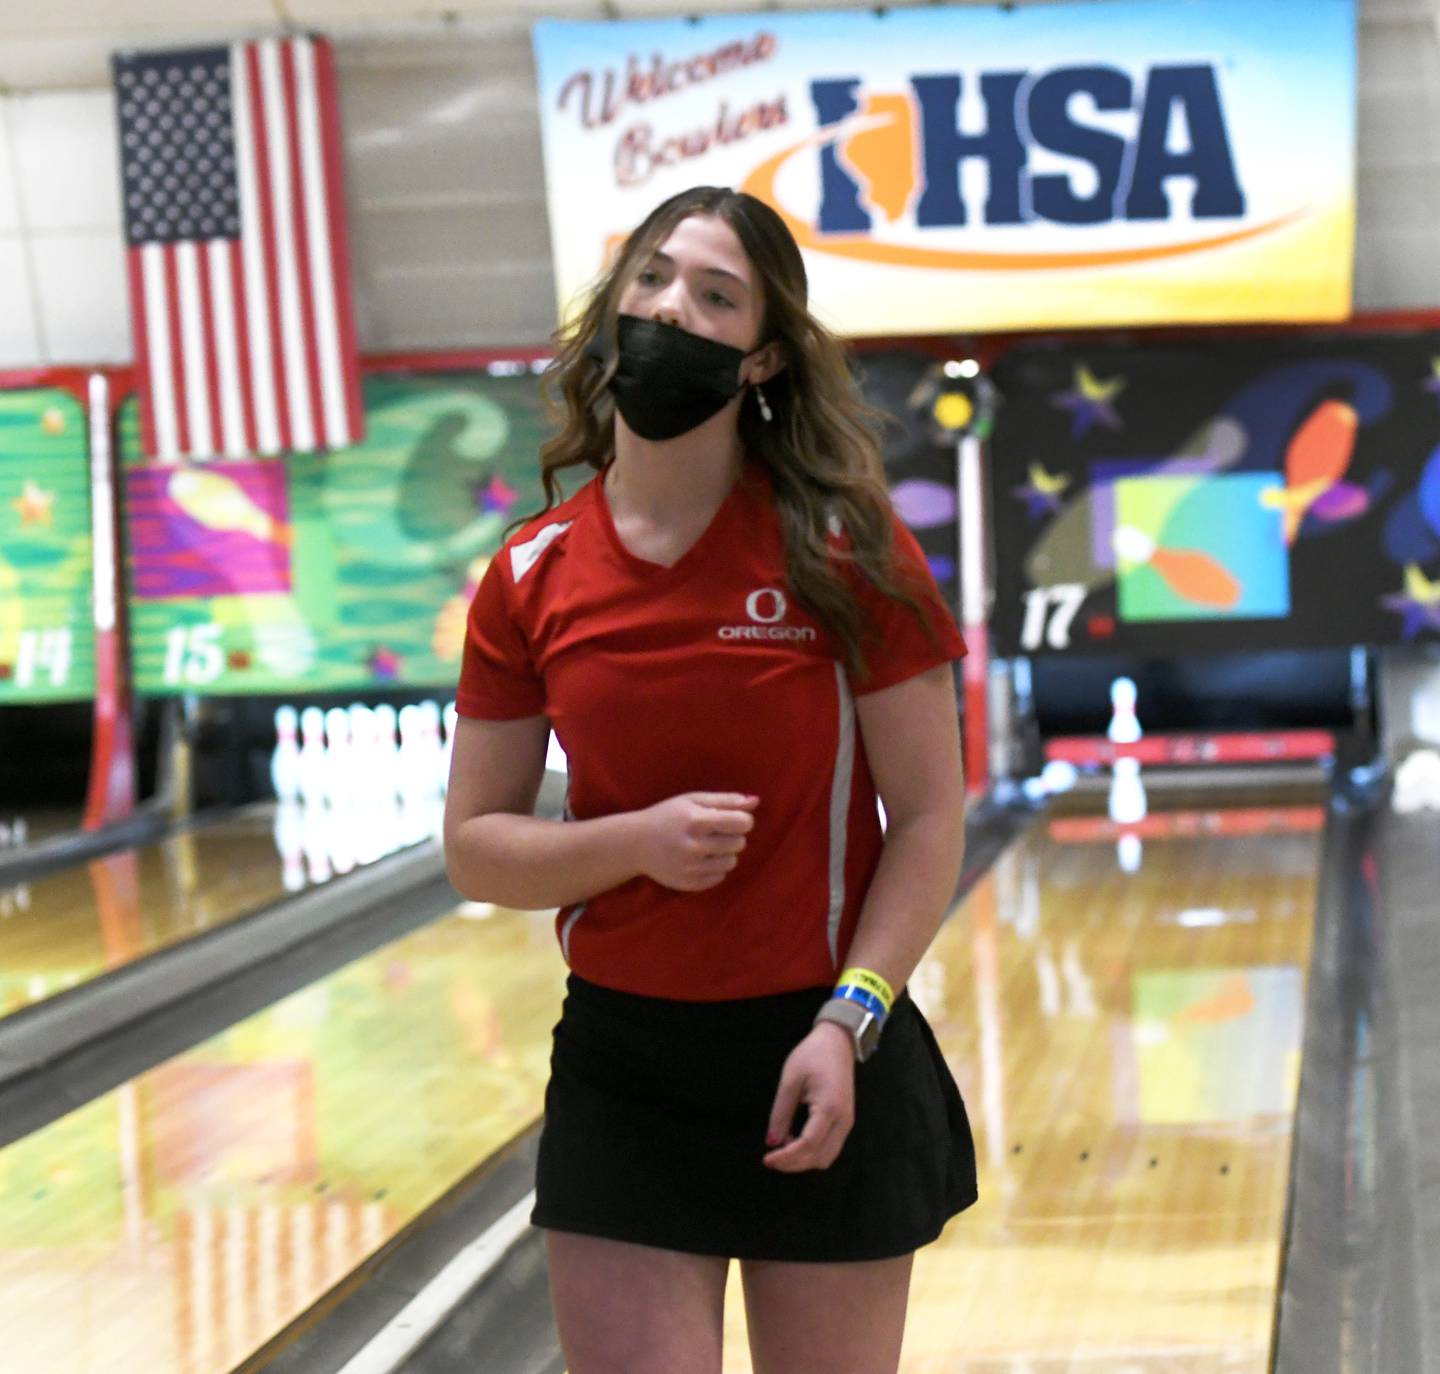 Oregon's Ava Wight reacts after a near-strike as she competes in the state bowling finals at the Cherry Bowl in Cherry Valley on Saturday.